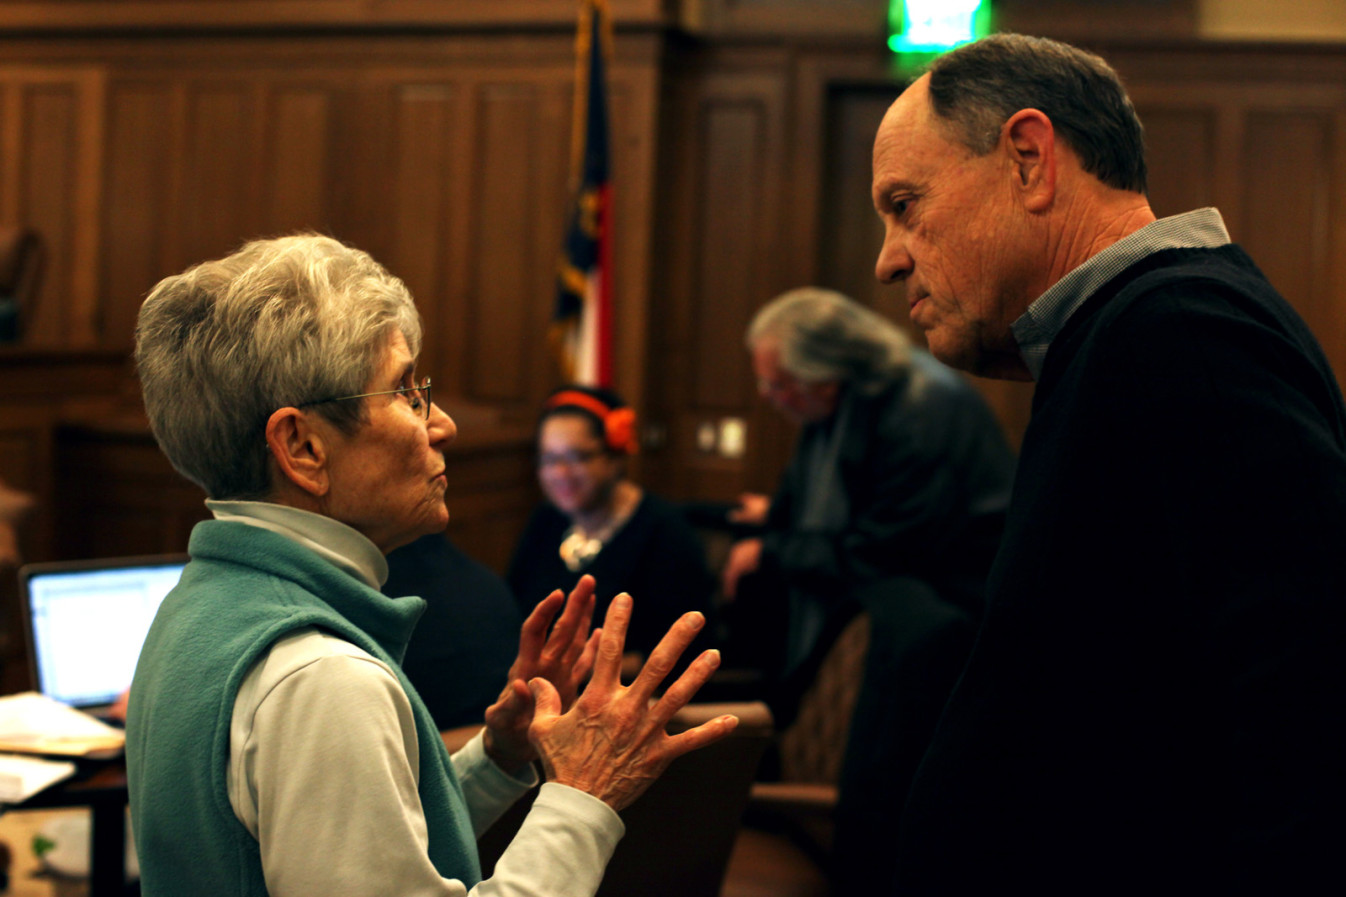 Mary Lucas, a local critic of Chatham Park, questions developer Tim Smith at a public meeting.